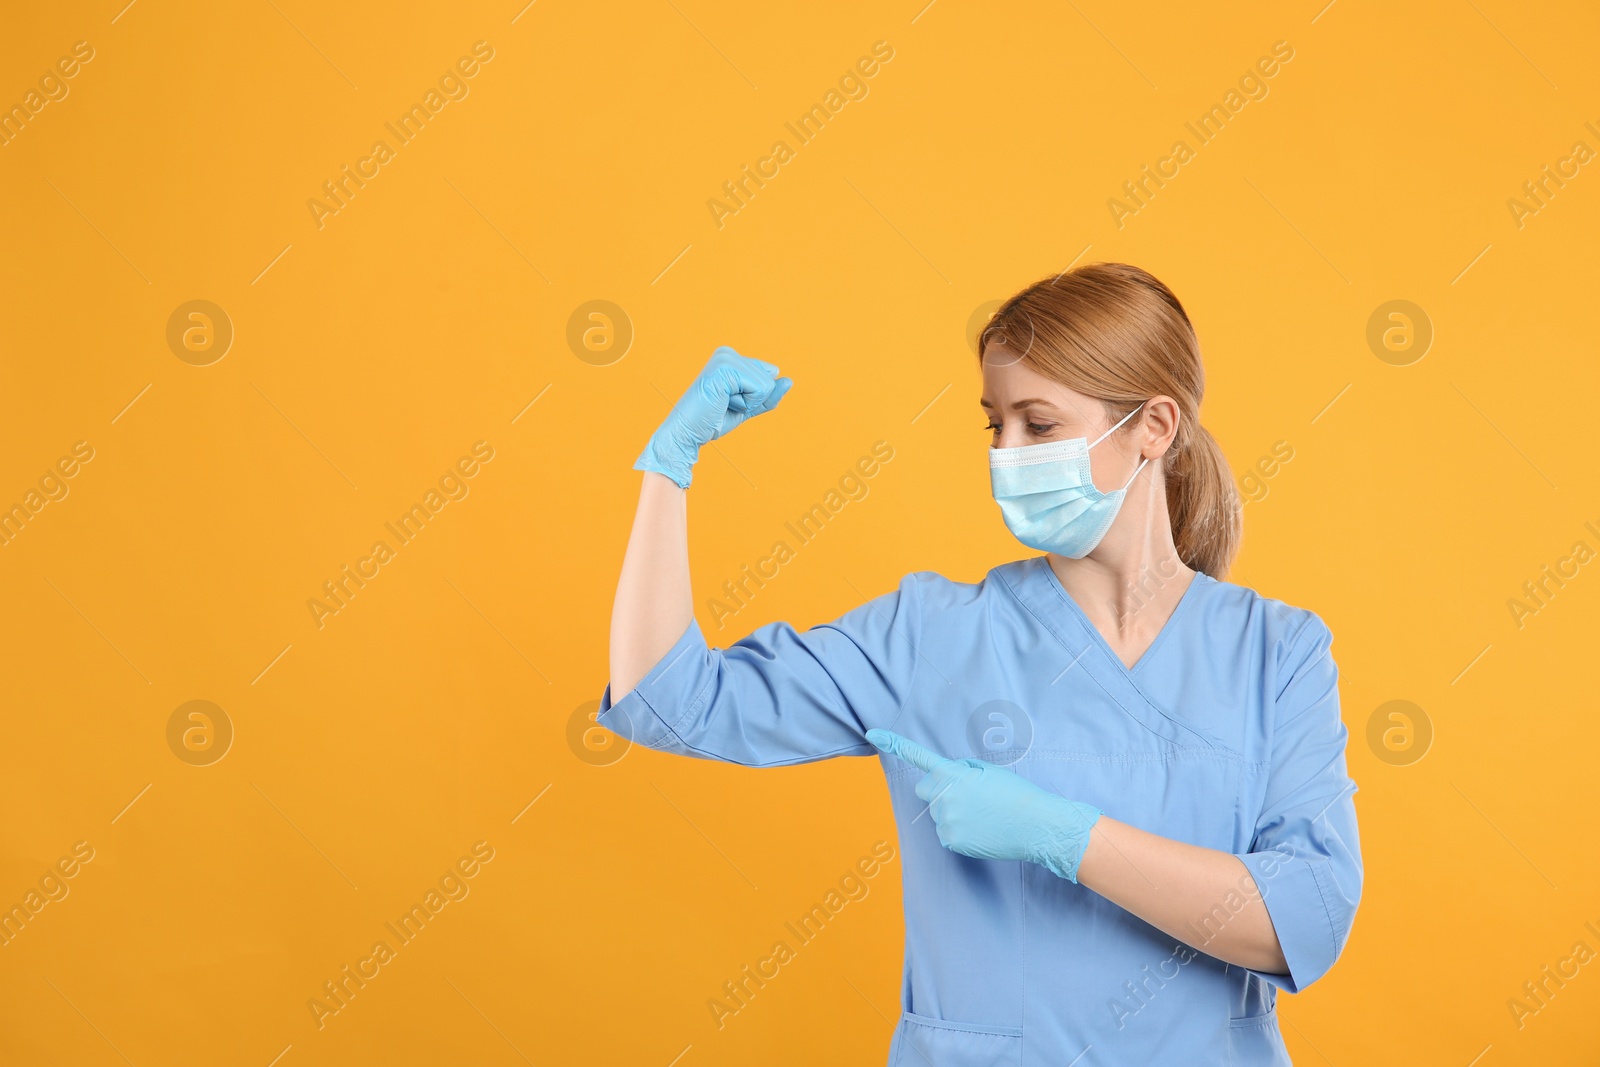 Photo of Doctor with protective mask showing muscles on yellow background, space for text. Strong immunity concept